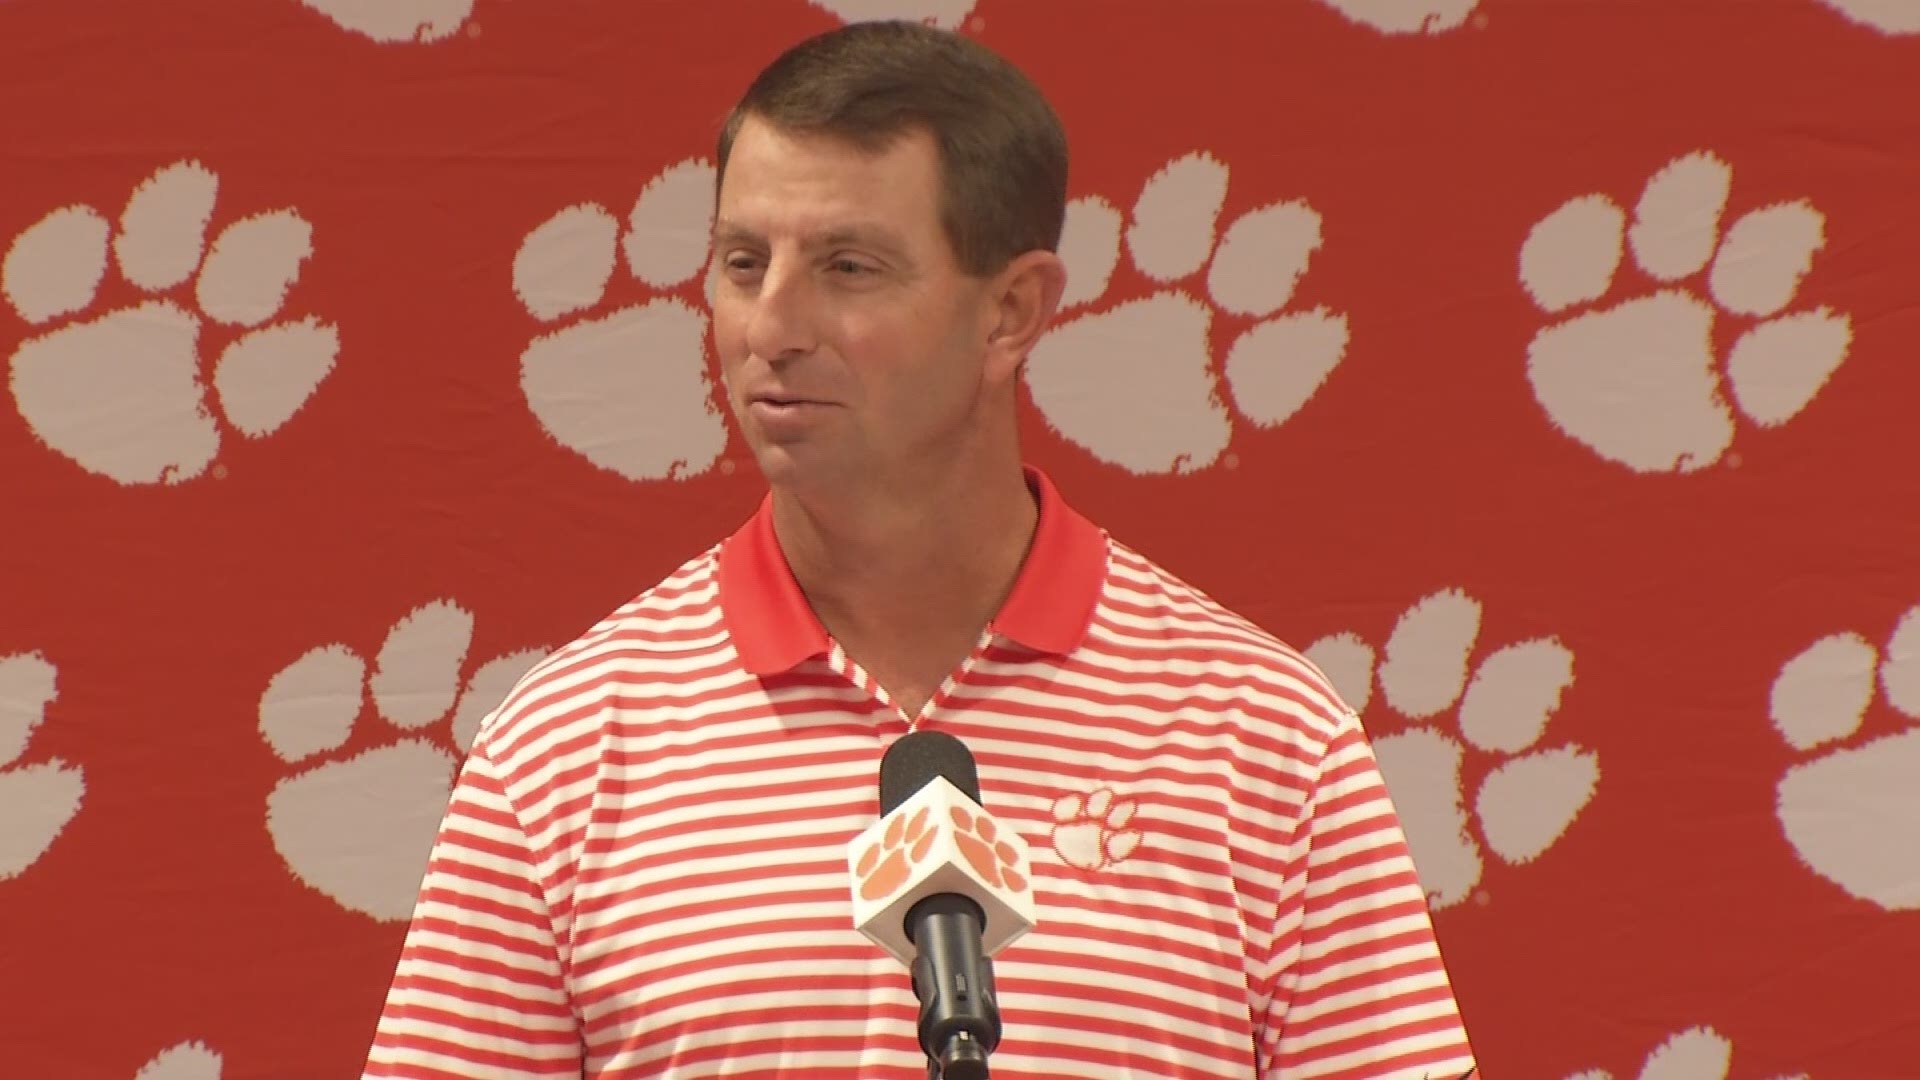 Clemson head football coach Dabo Swinney brought his A-game to Tuesday's news conference for Georgia Tech.